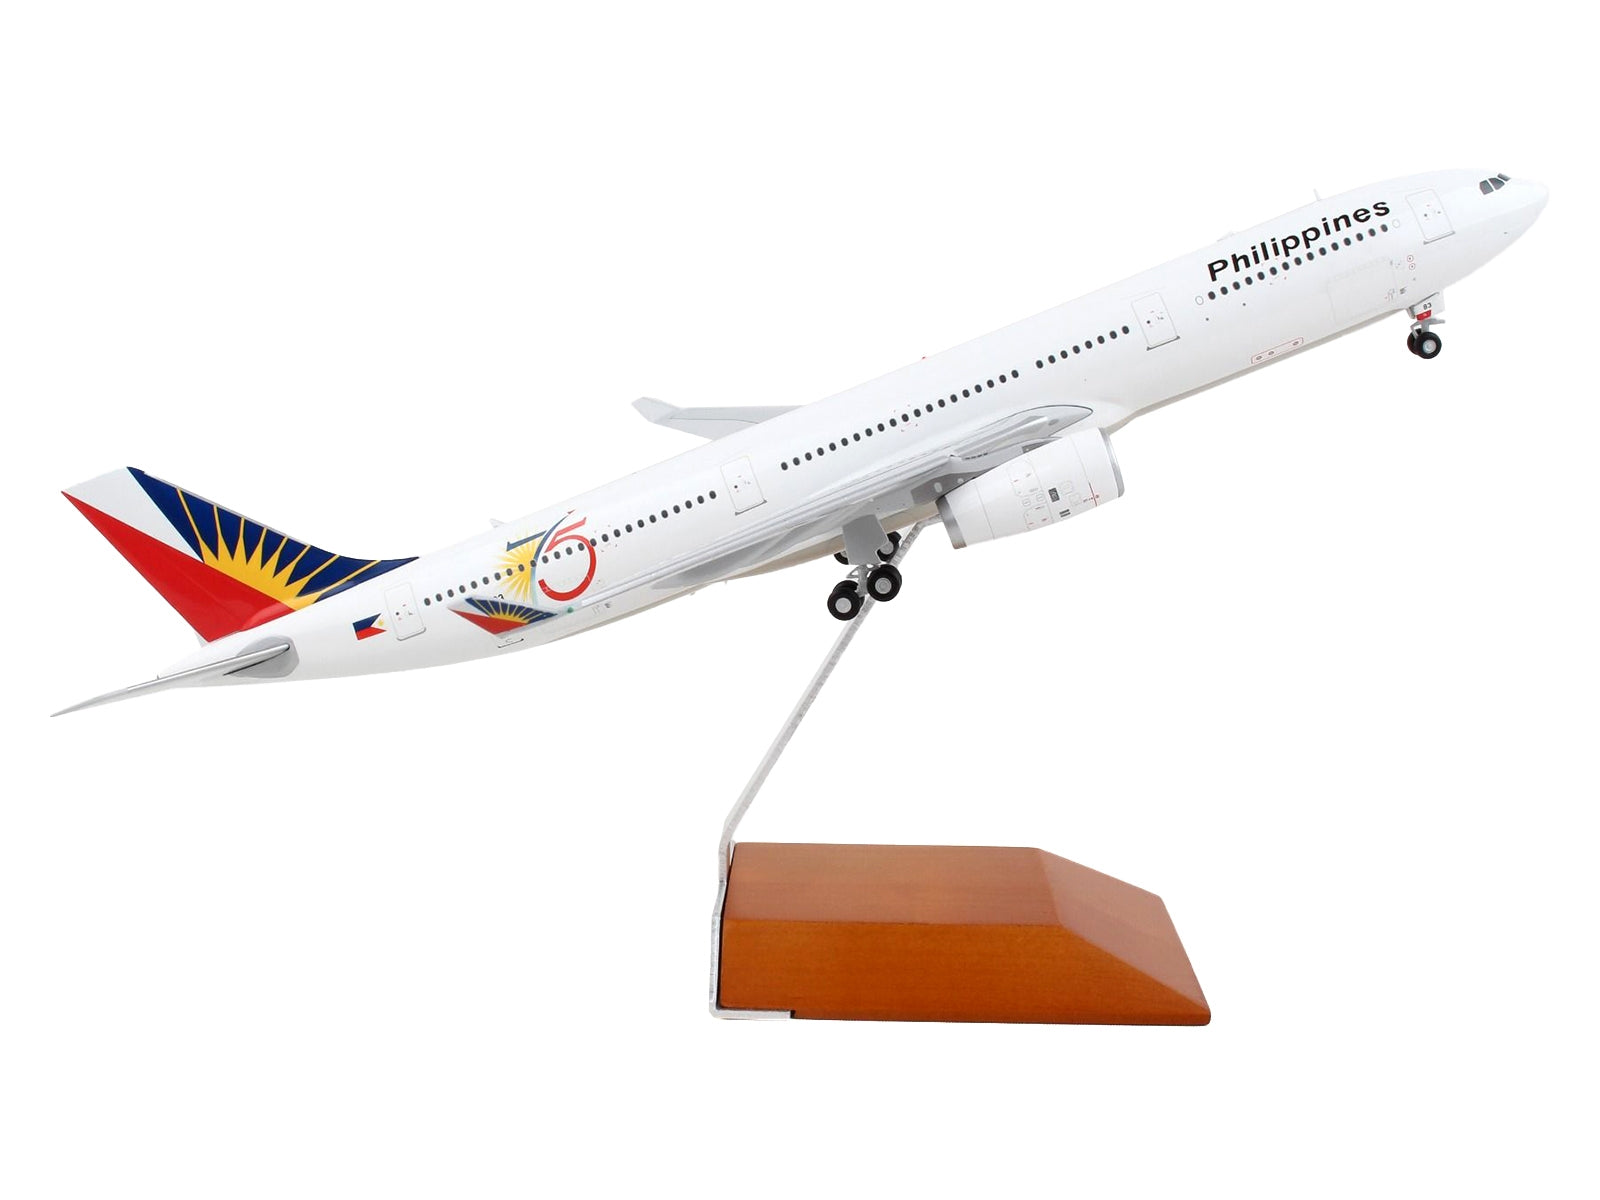 Airbus A330-300 Commercial Aircraft "Philippine Airlines - 75th Anniversary"